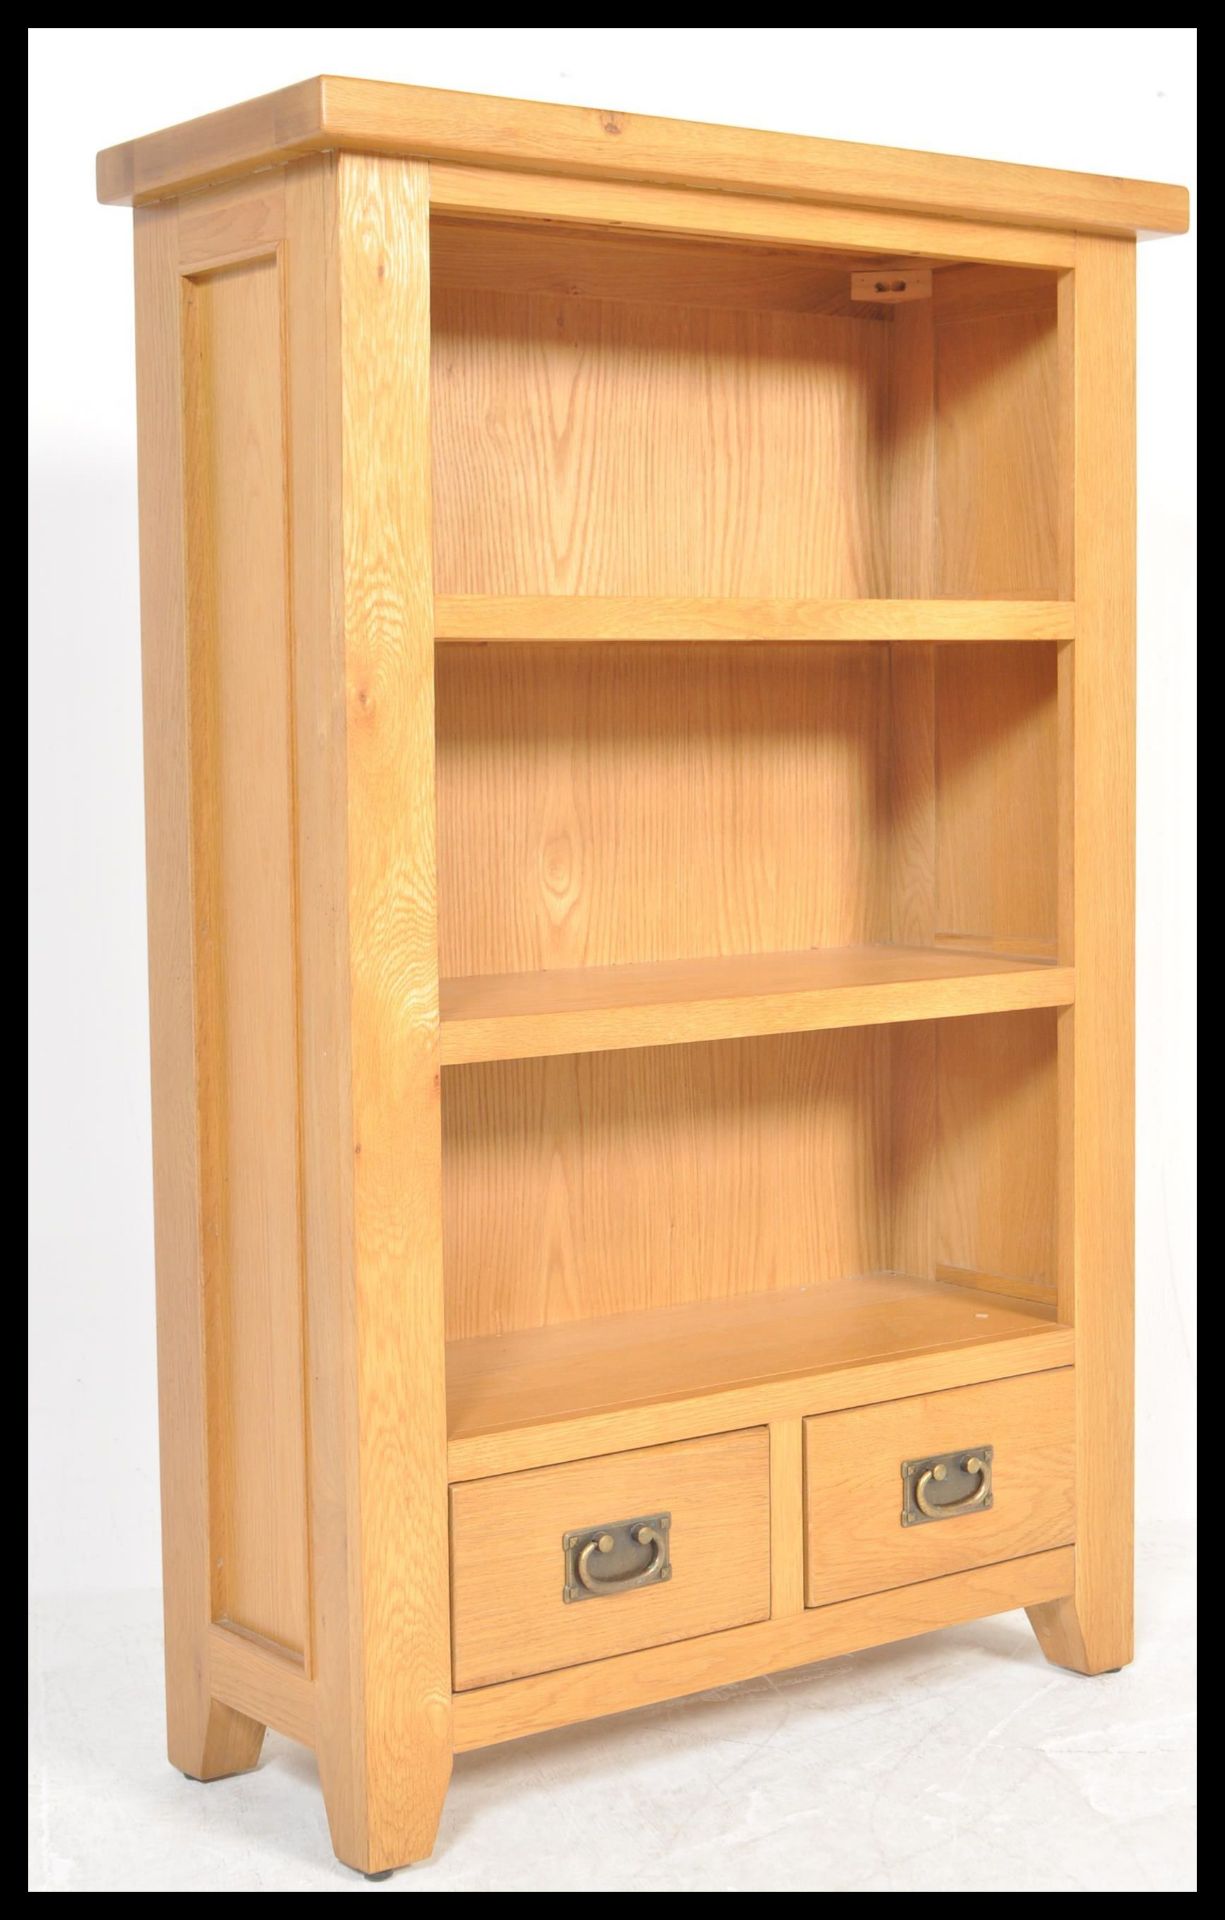 A contemporary chunk oak furniture land style upright wine cabinet bookcase. The top with